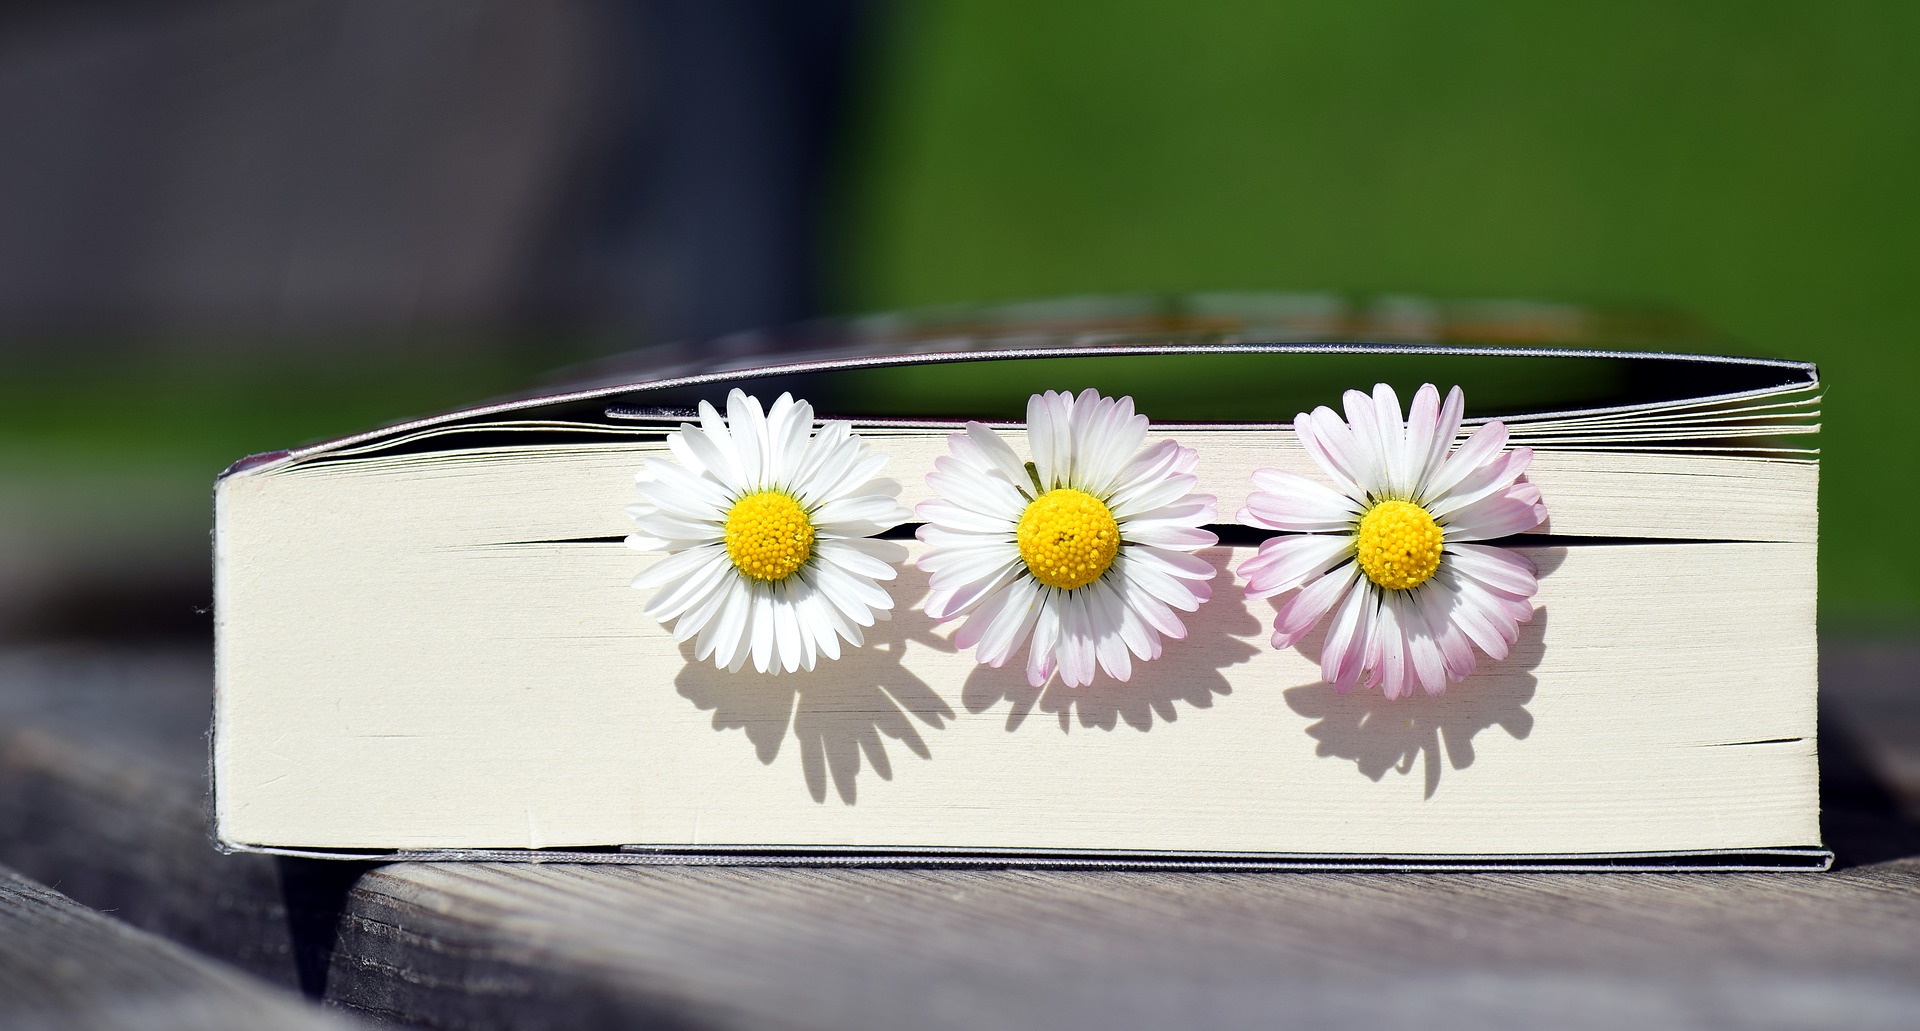 Banner image of daisies in a book